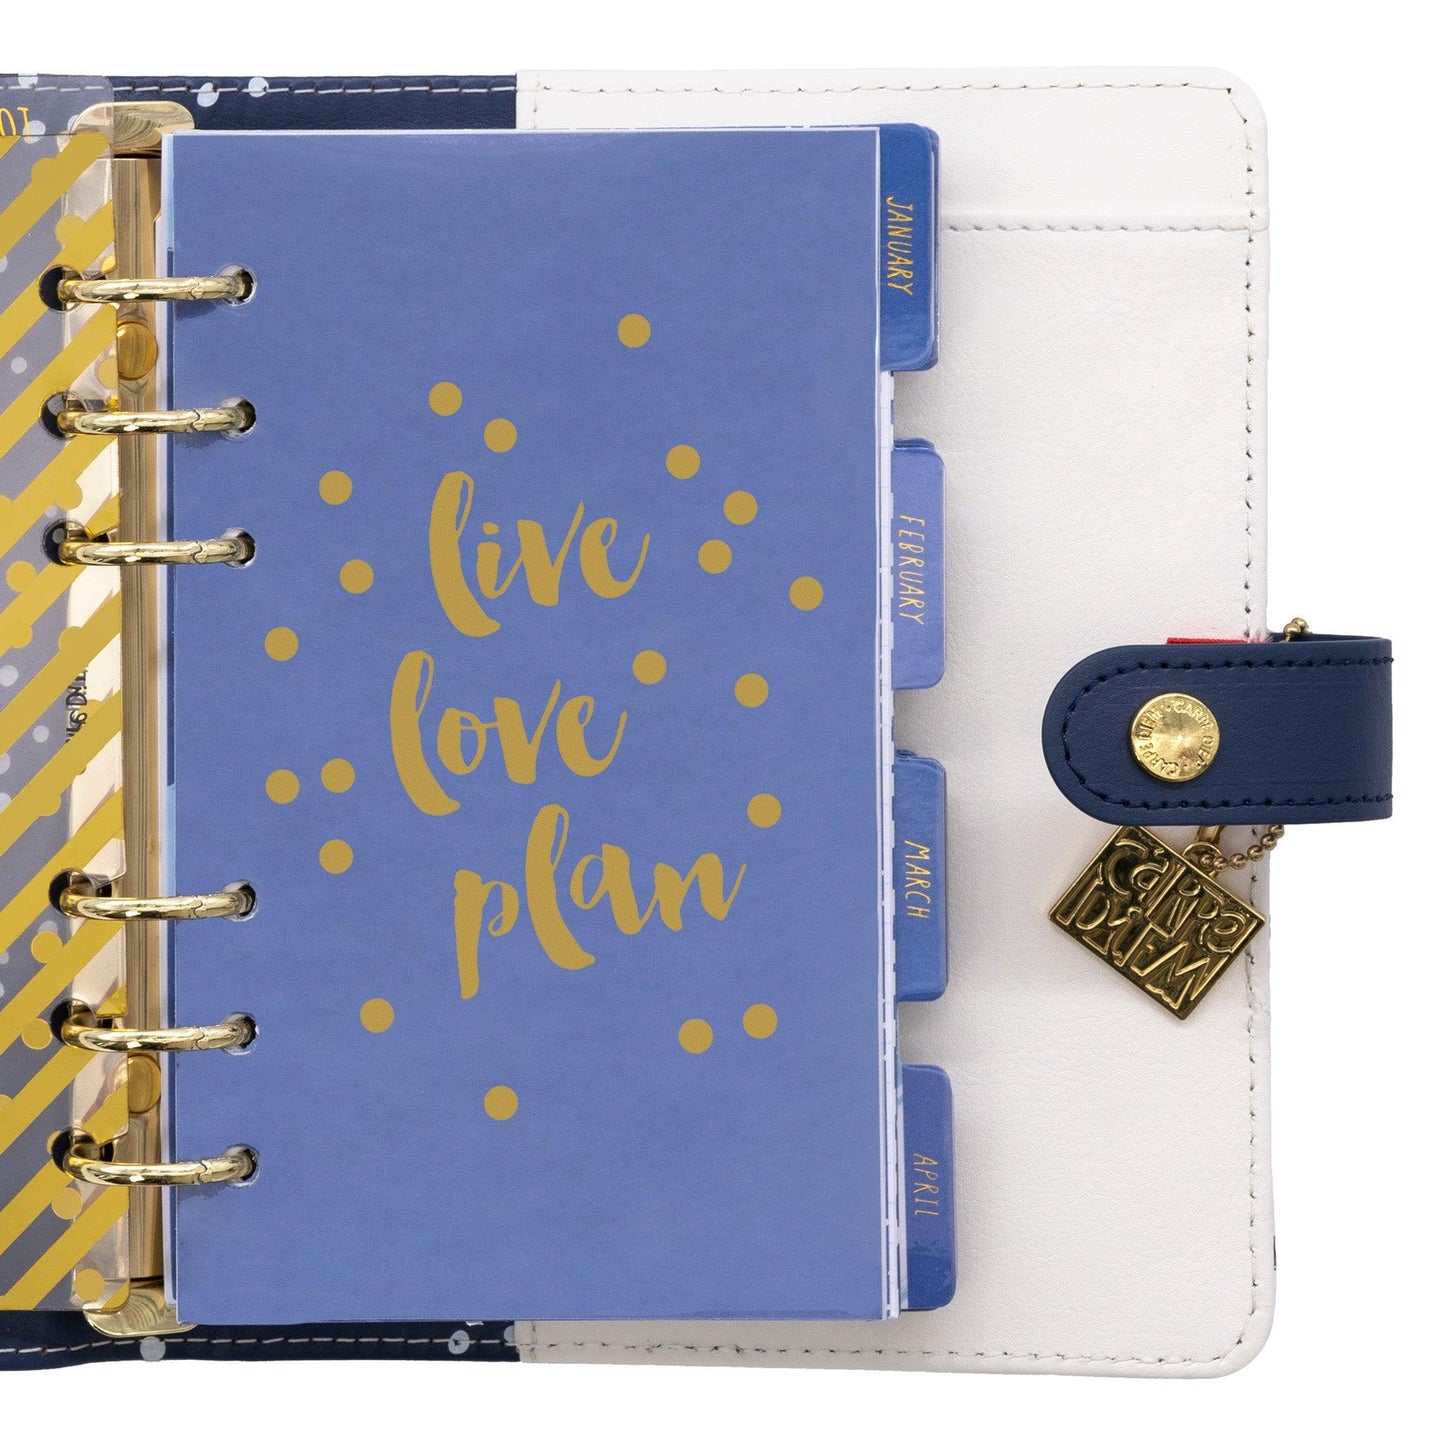 Personal Planner - Color Wash - Loomini